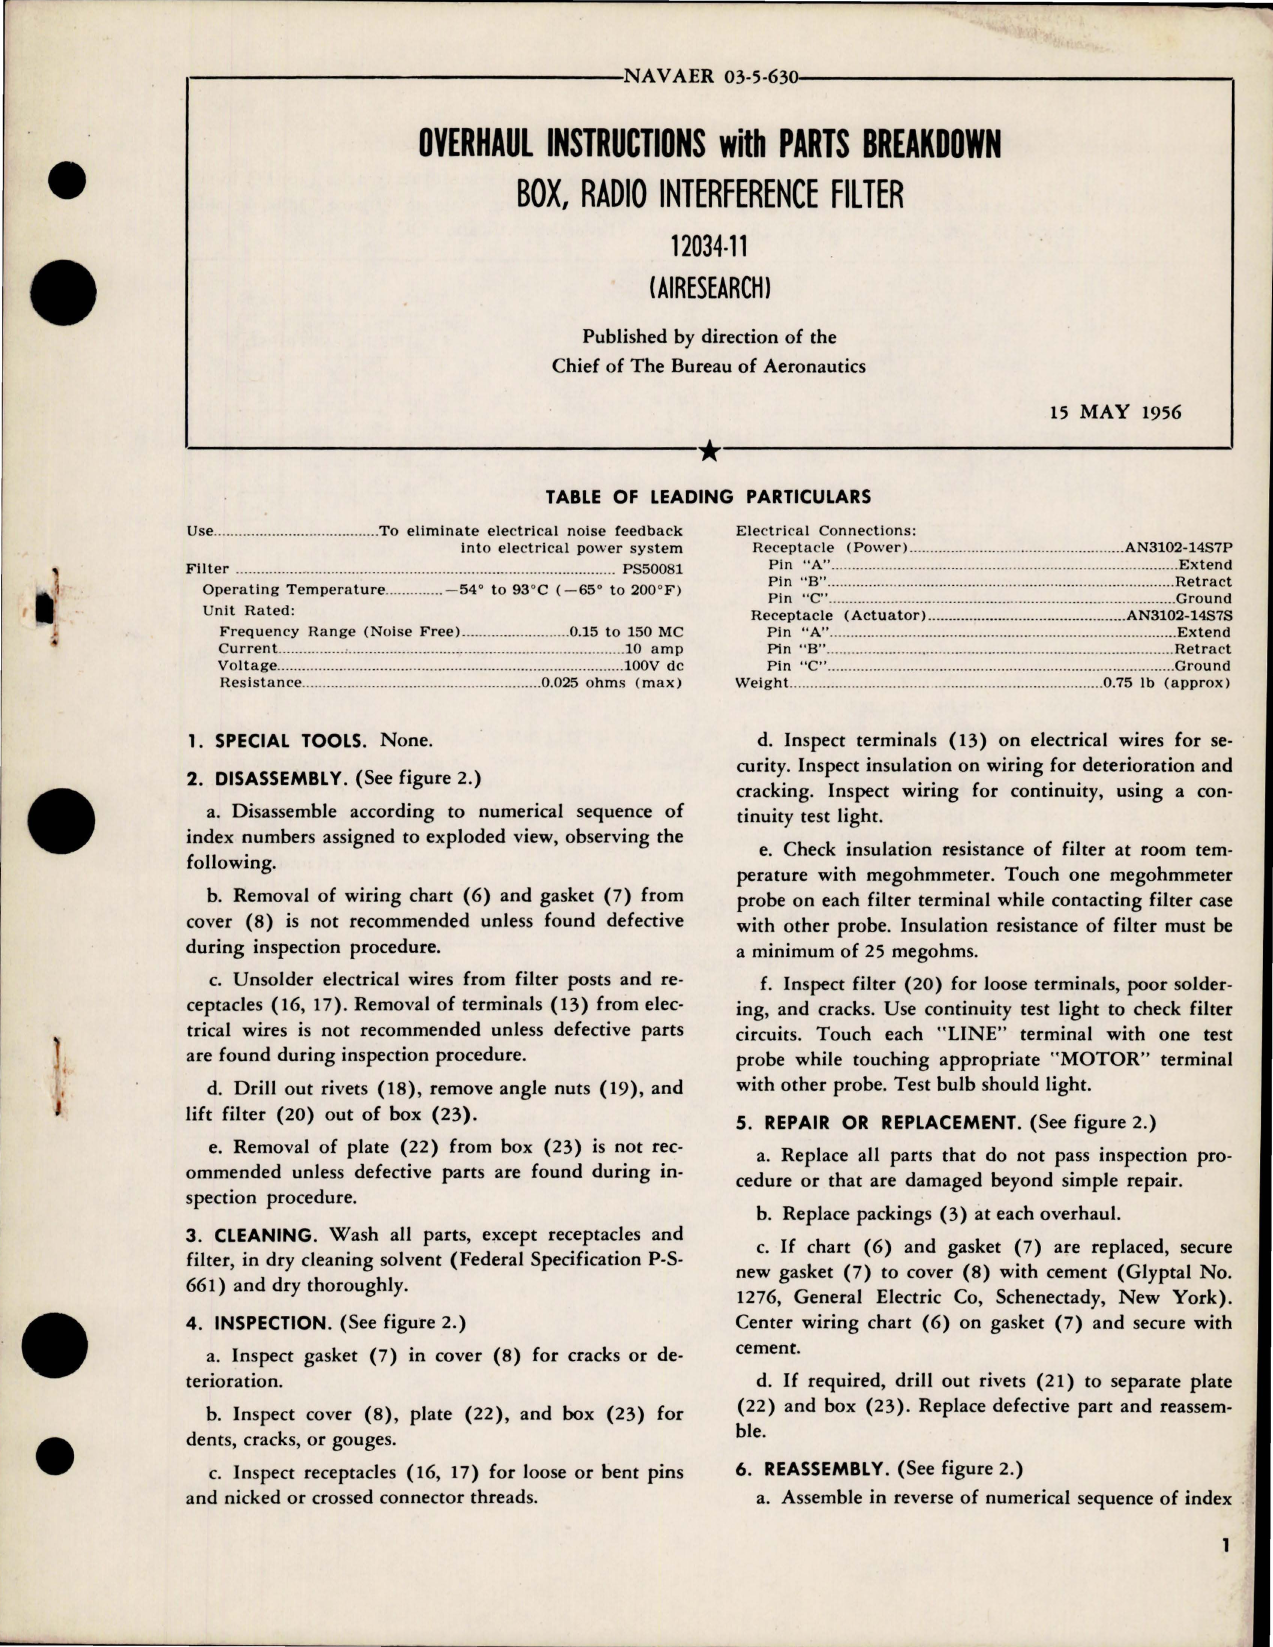 Sample page 1 from AirCorps Library document: Overhaul Instructions with Parts Breakdown for Radio Interference Filter Box - 1203411 